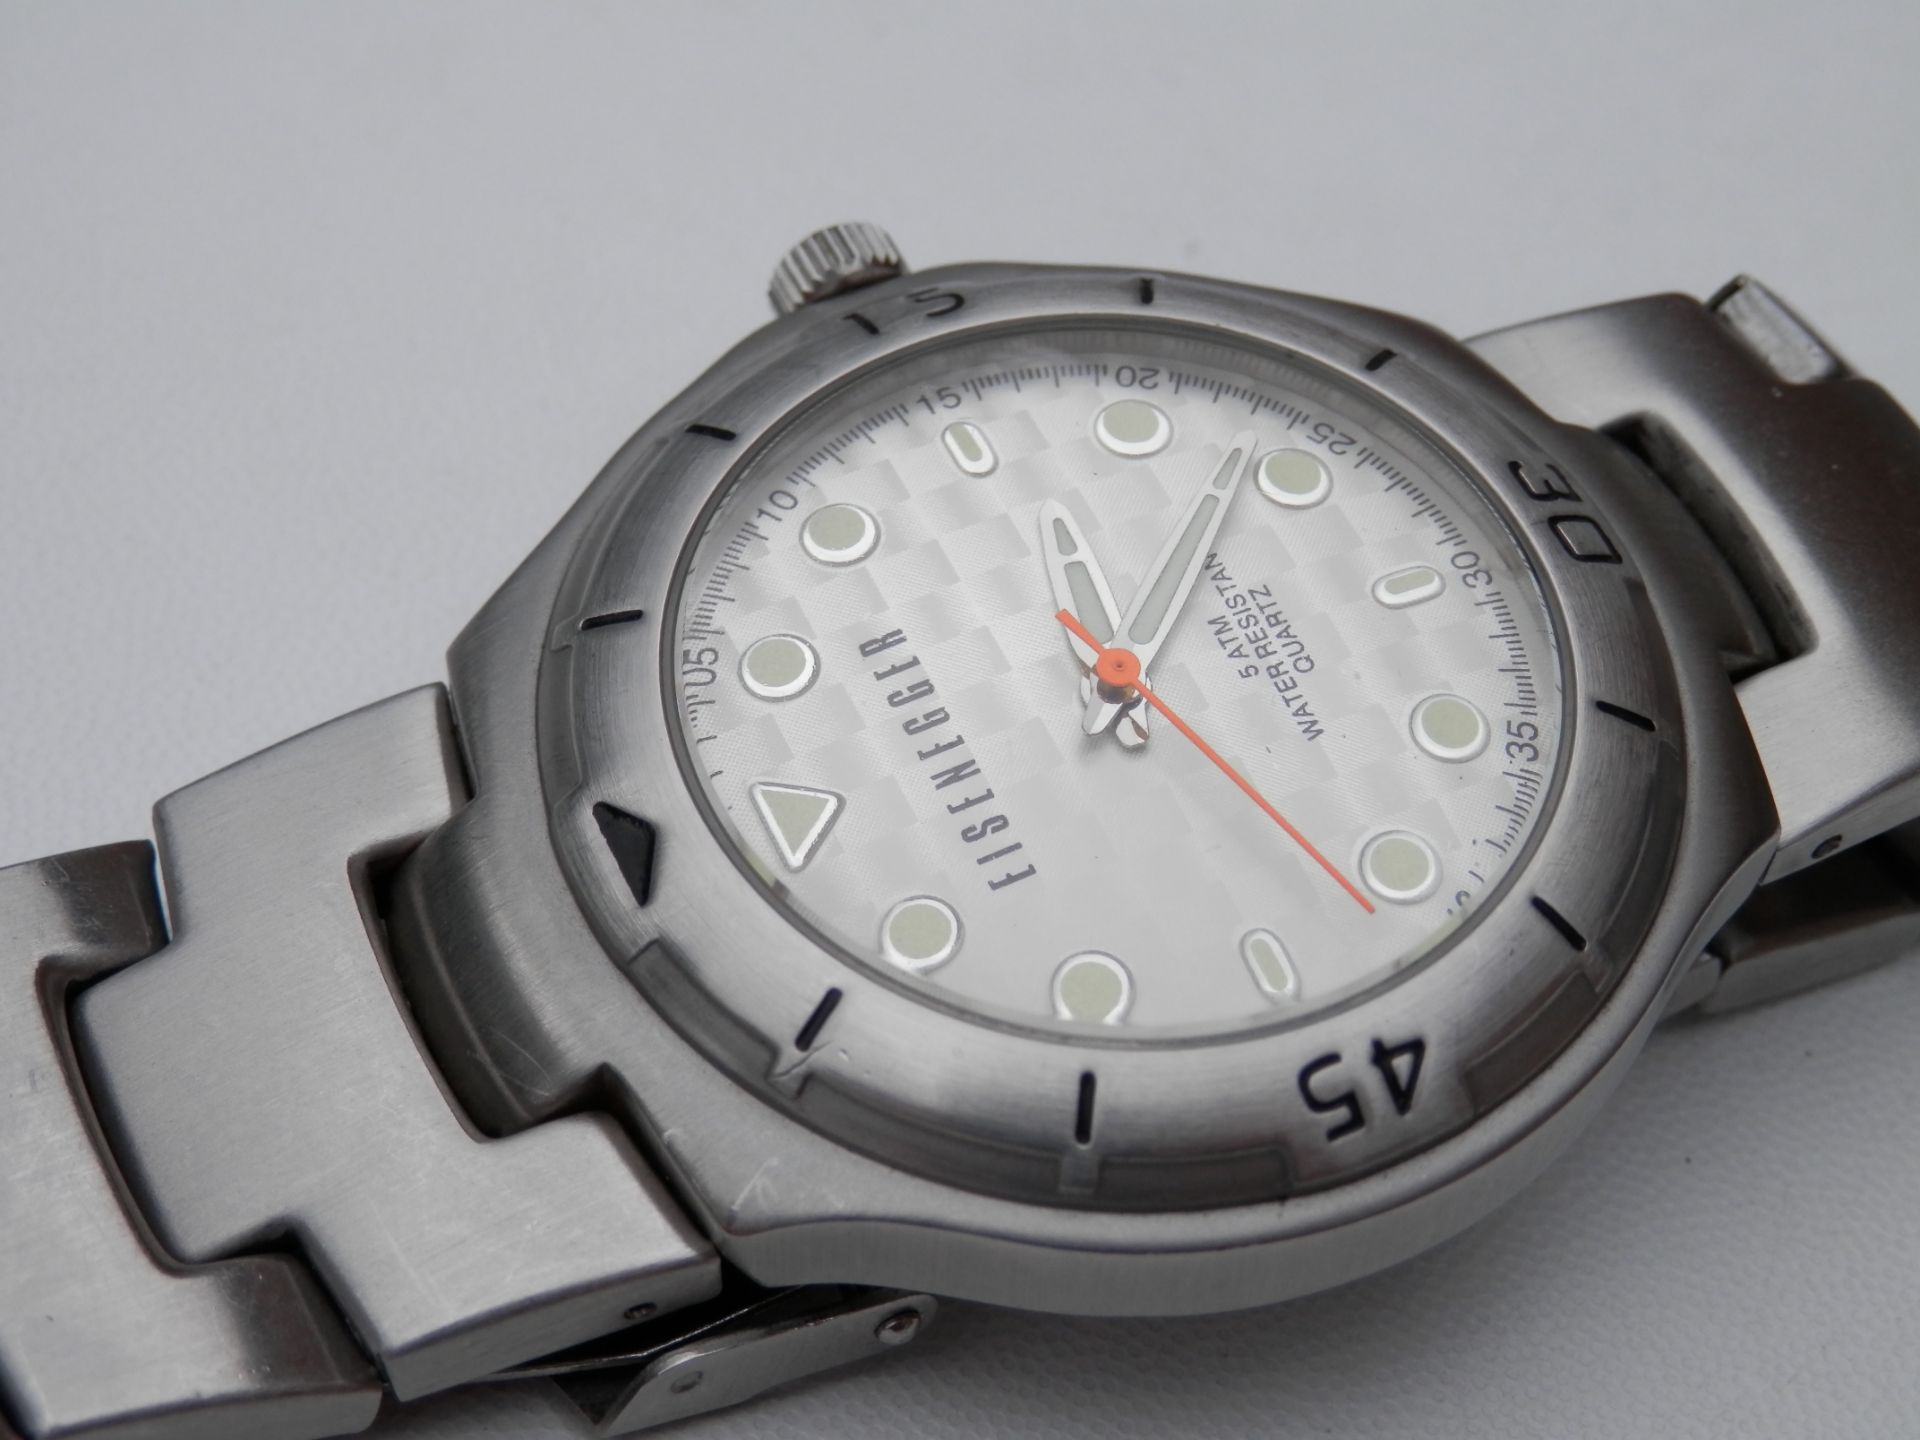 HEAVY FULL STAINLESS EISENEGGER 42MM QUARTZ 5ATM WR WATCH, WITH 8" STRAP. RRP £95 - Image 6 of 9